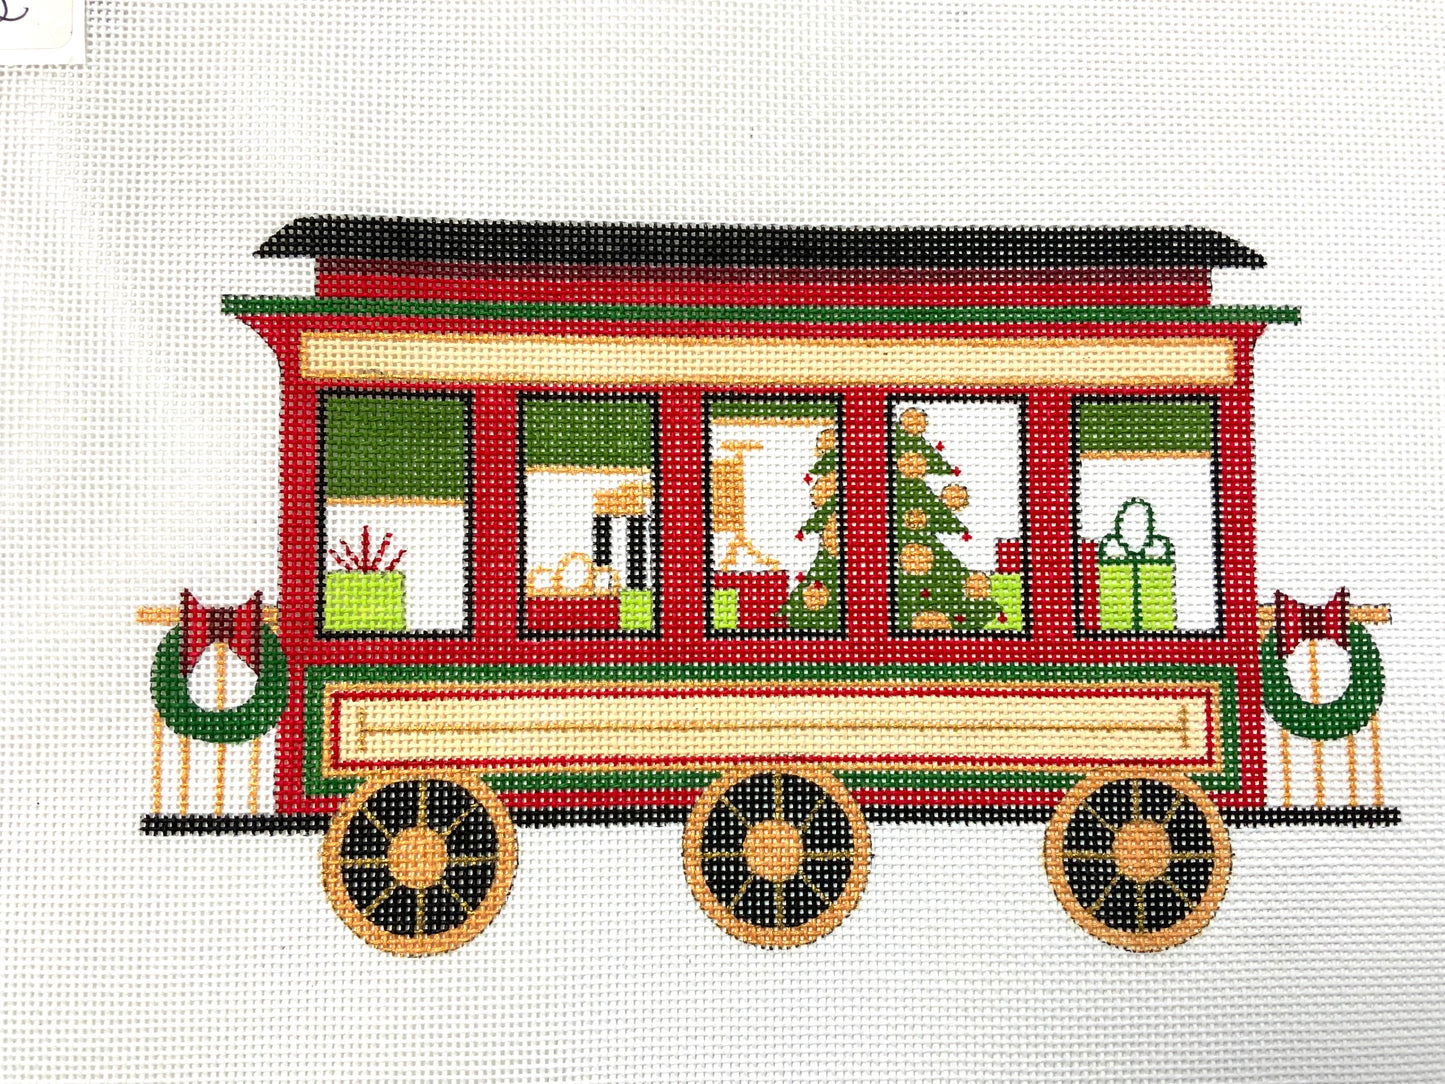 Train Series Passenger Car with Presents